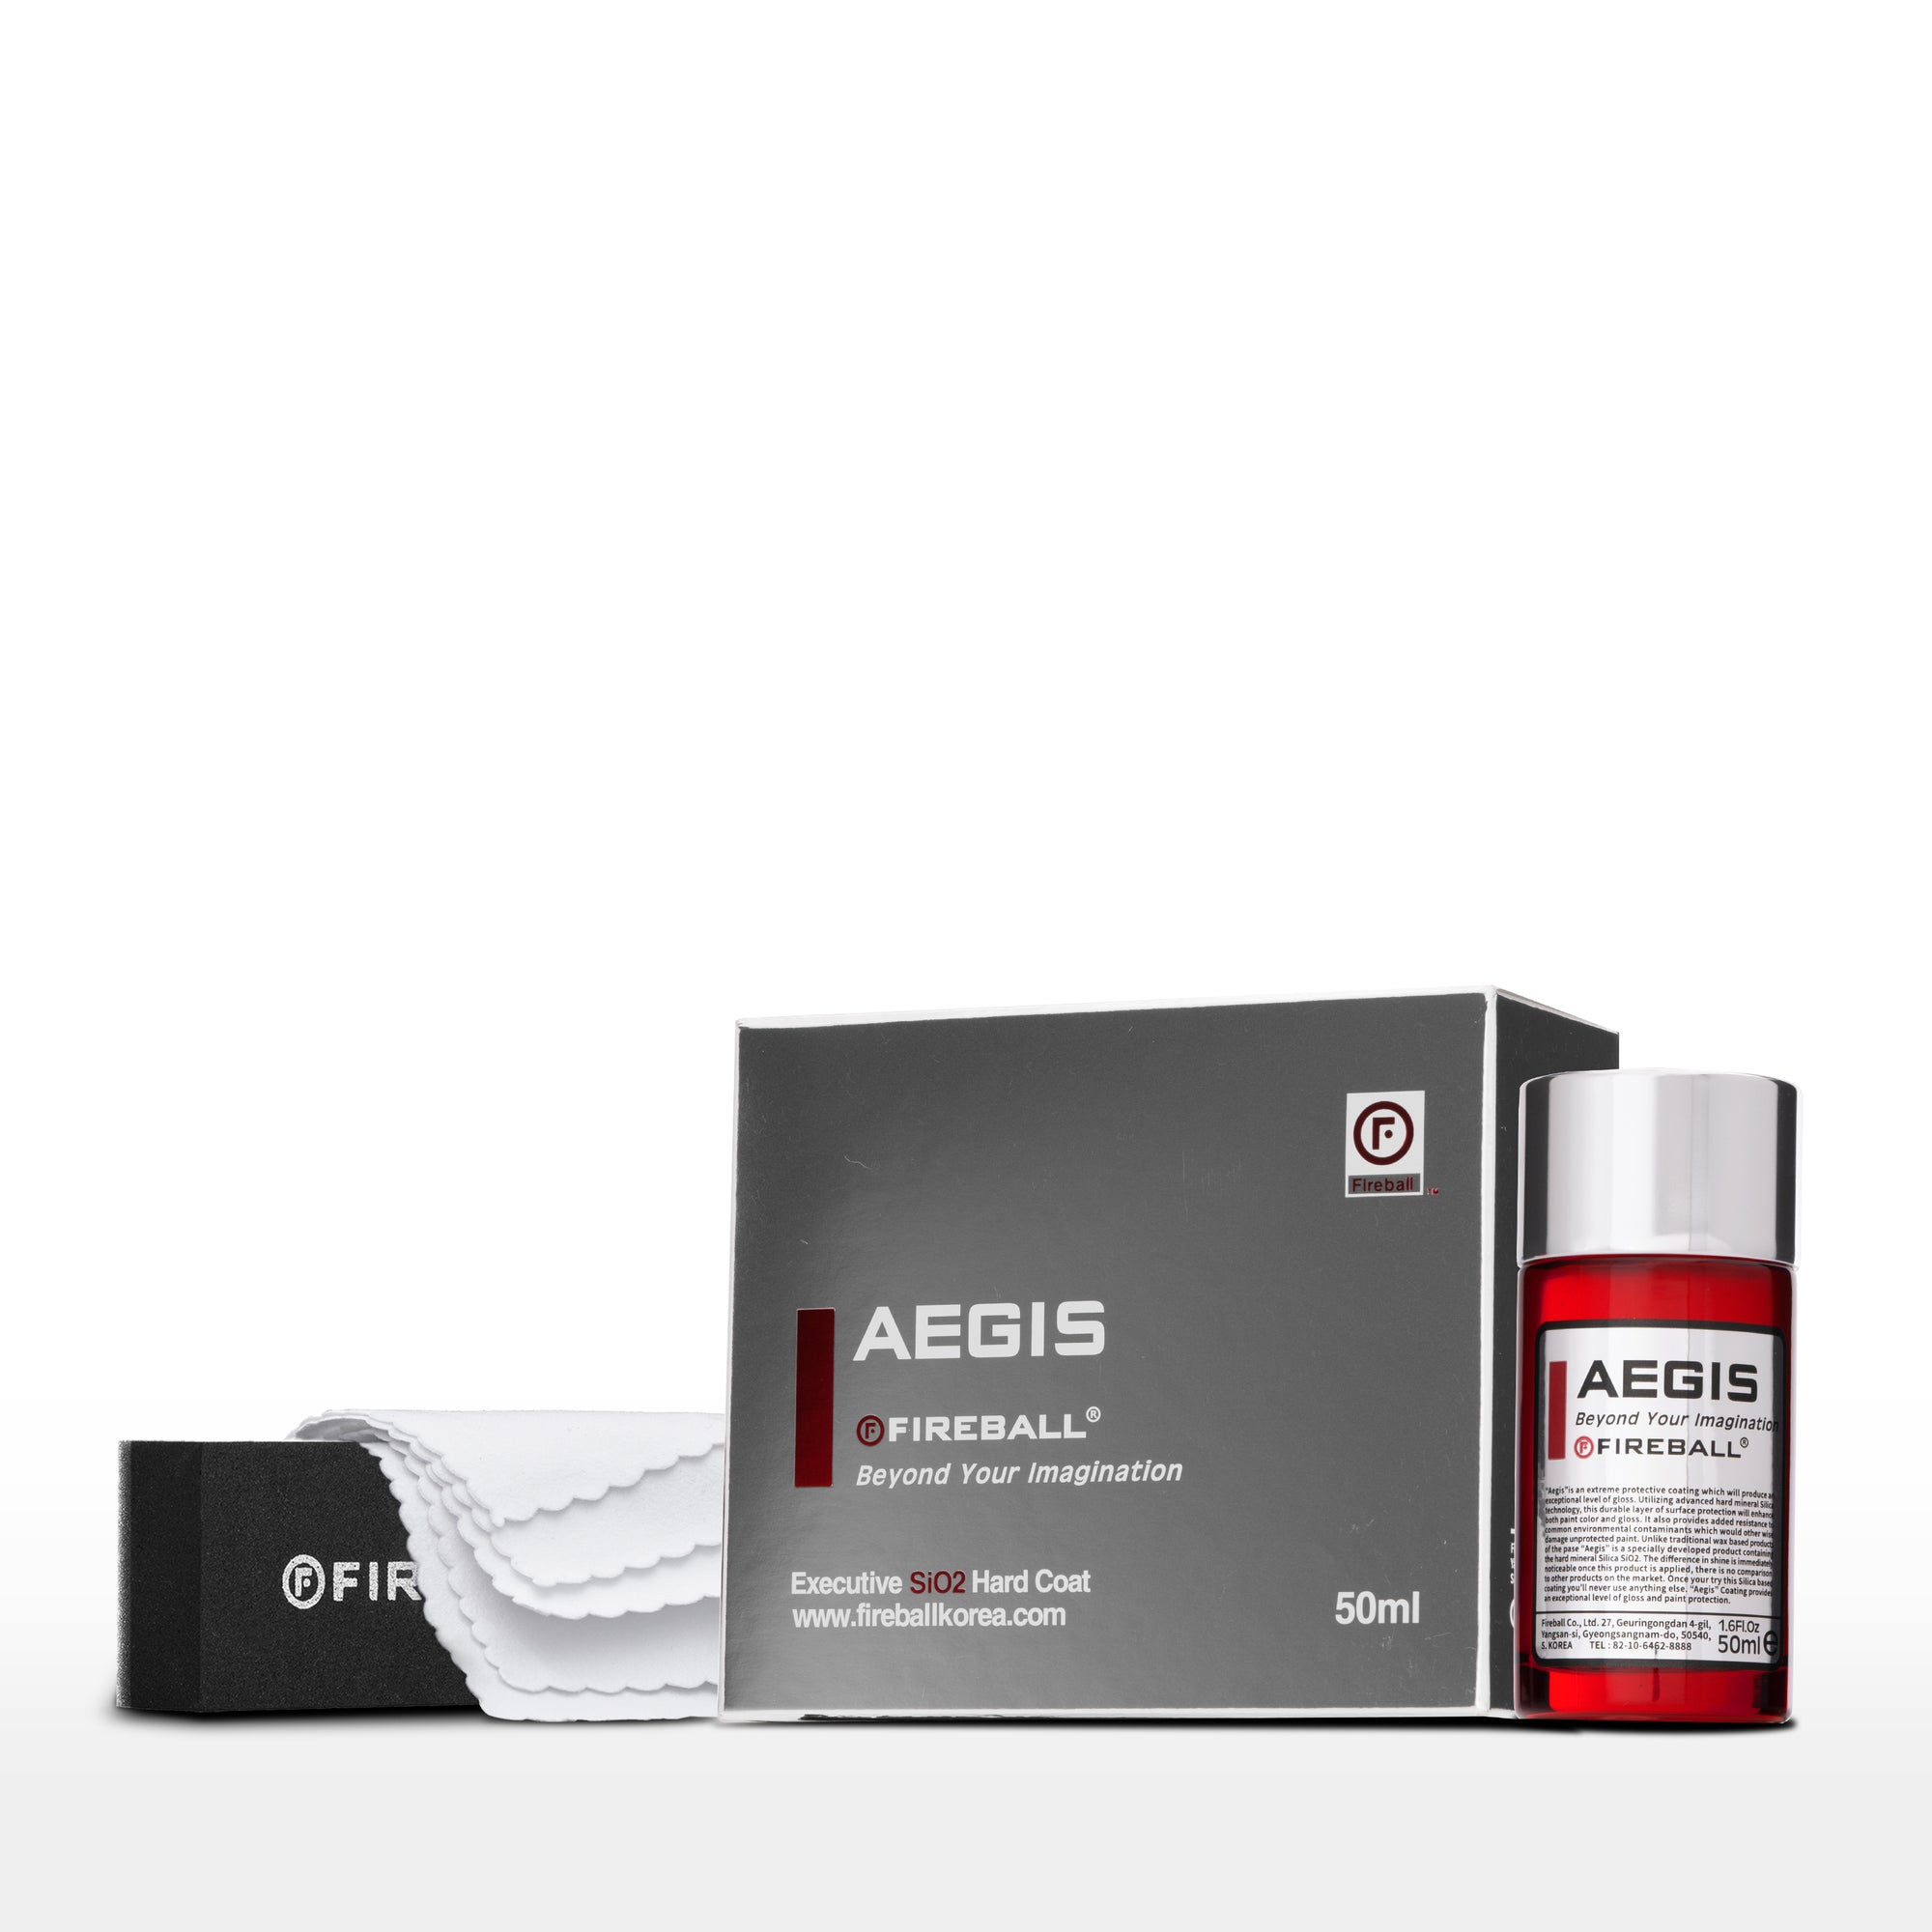 Fireball Aegis 50mL (AUTHORIZED PROFESSIONAL ONLY, CONTACT US FOR ACCESS)